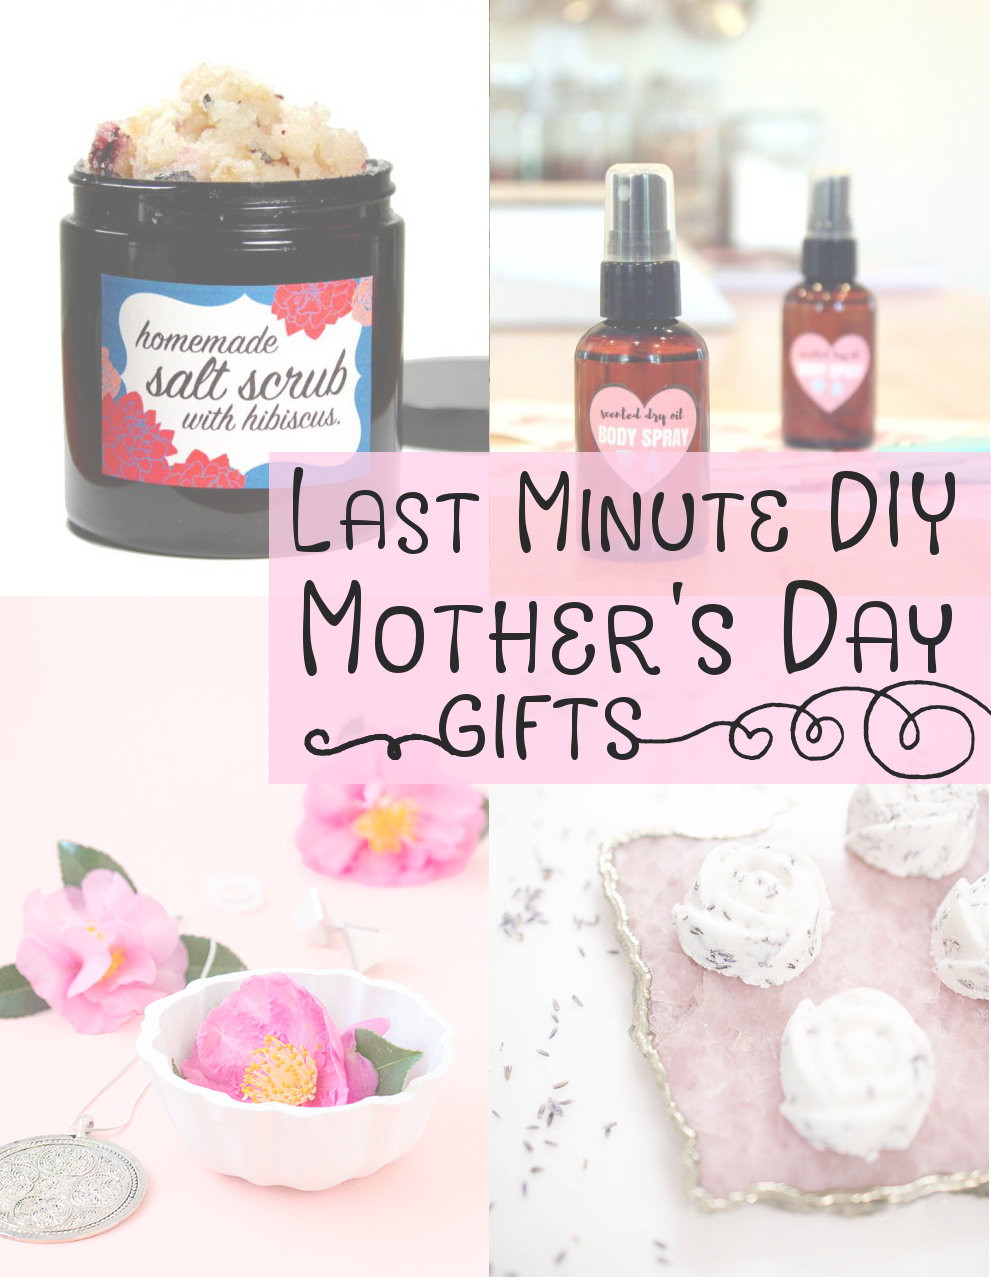 Last Minute Mother's Day Gifts
 8 Last Minute Mother s Day Gift Ideas to DIY Soap Deli News